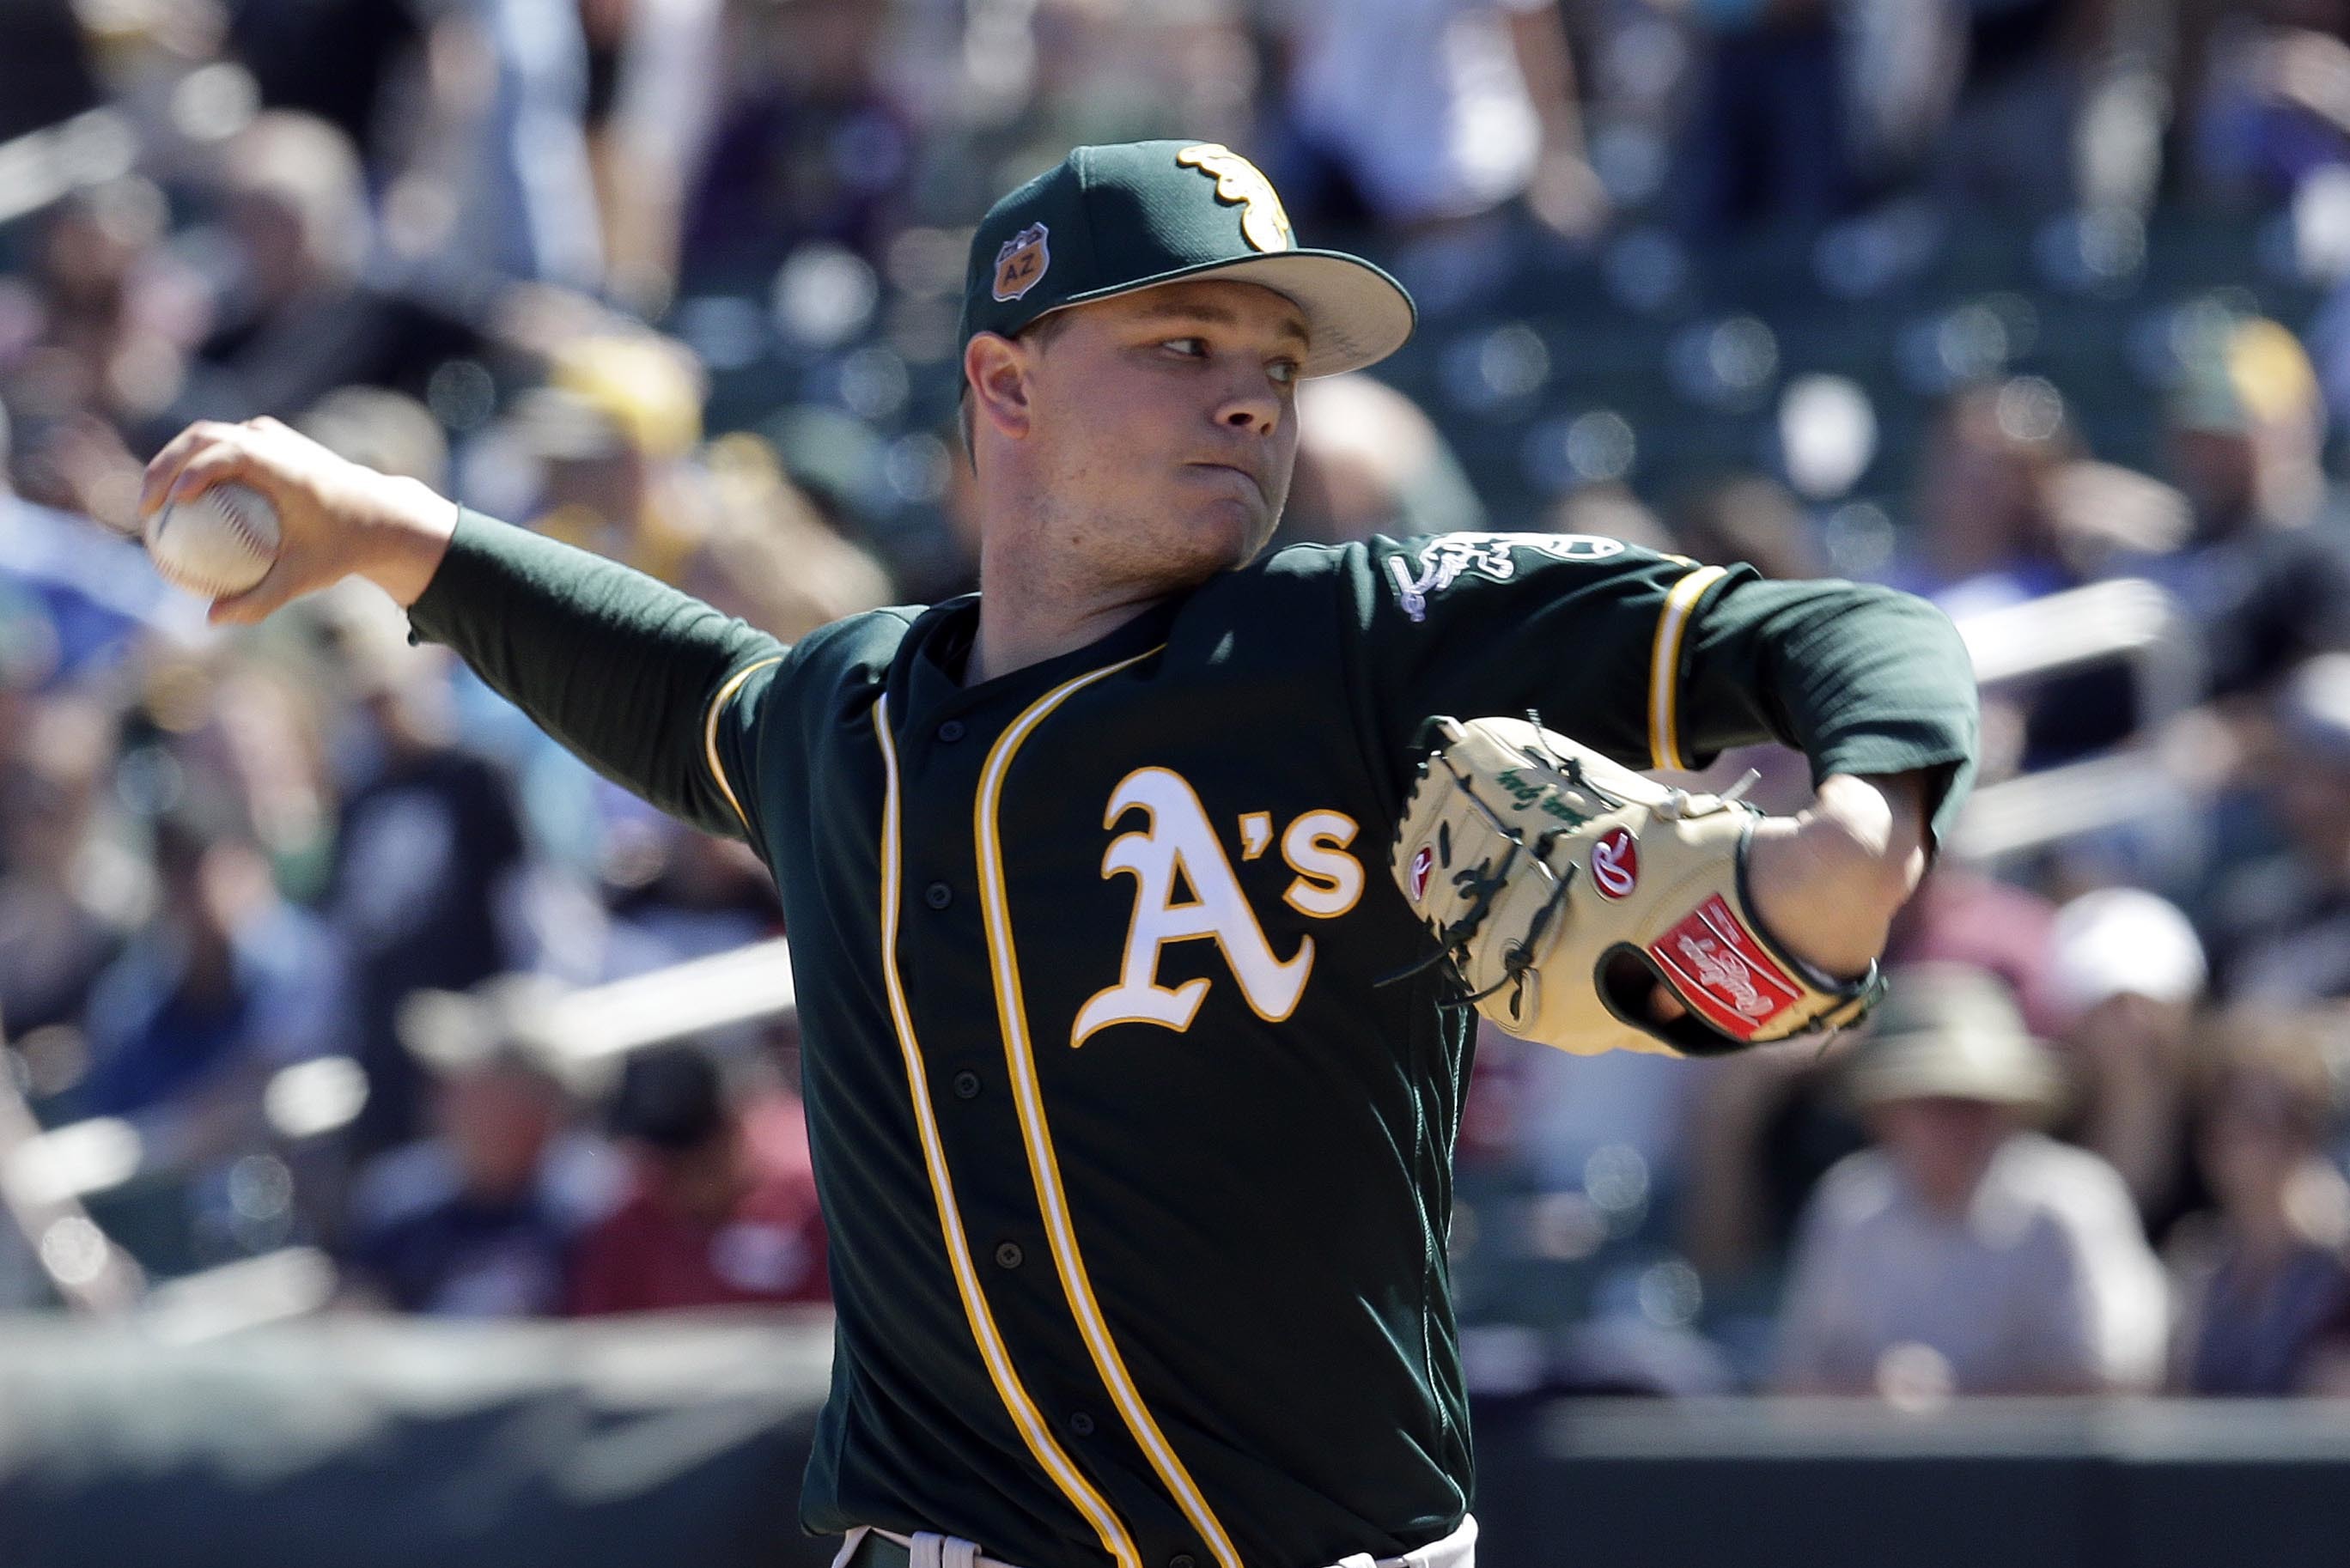 Sonny Gray -- Game Used Jersey -- Worn Aug 5 (Winning Pitcher: W-4, 5.0 IP,  7 K) -- Size 44